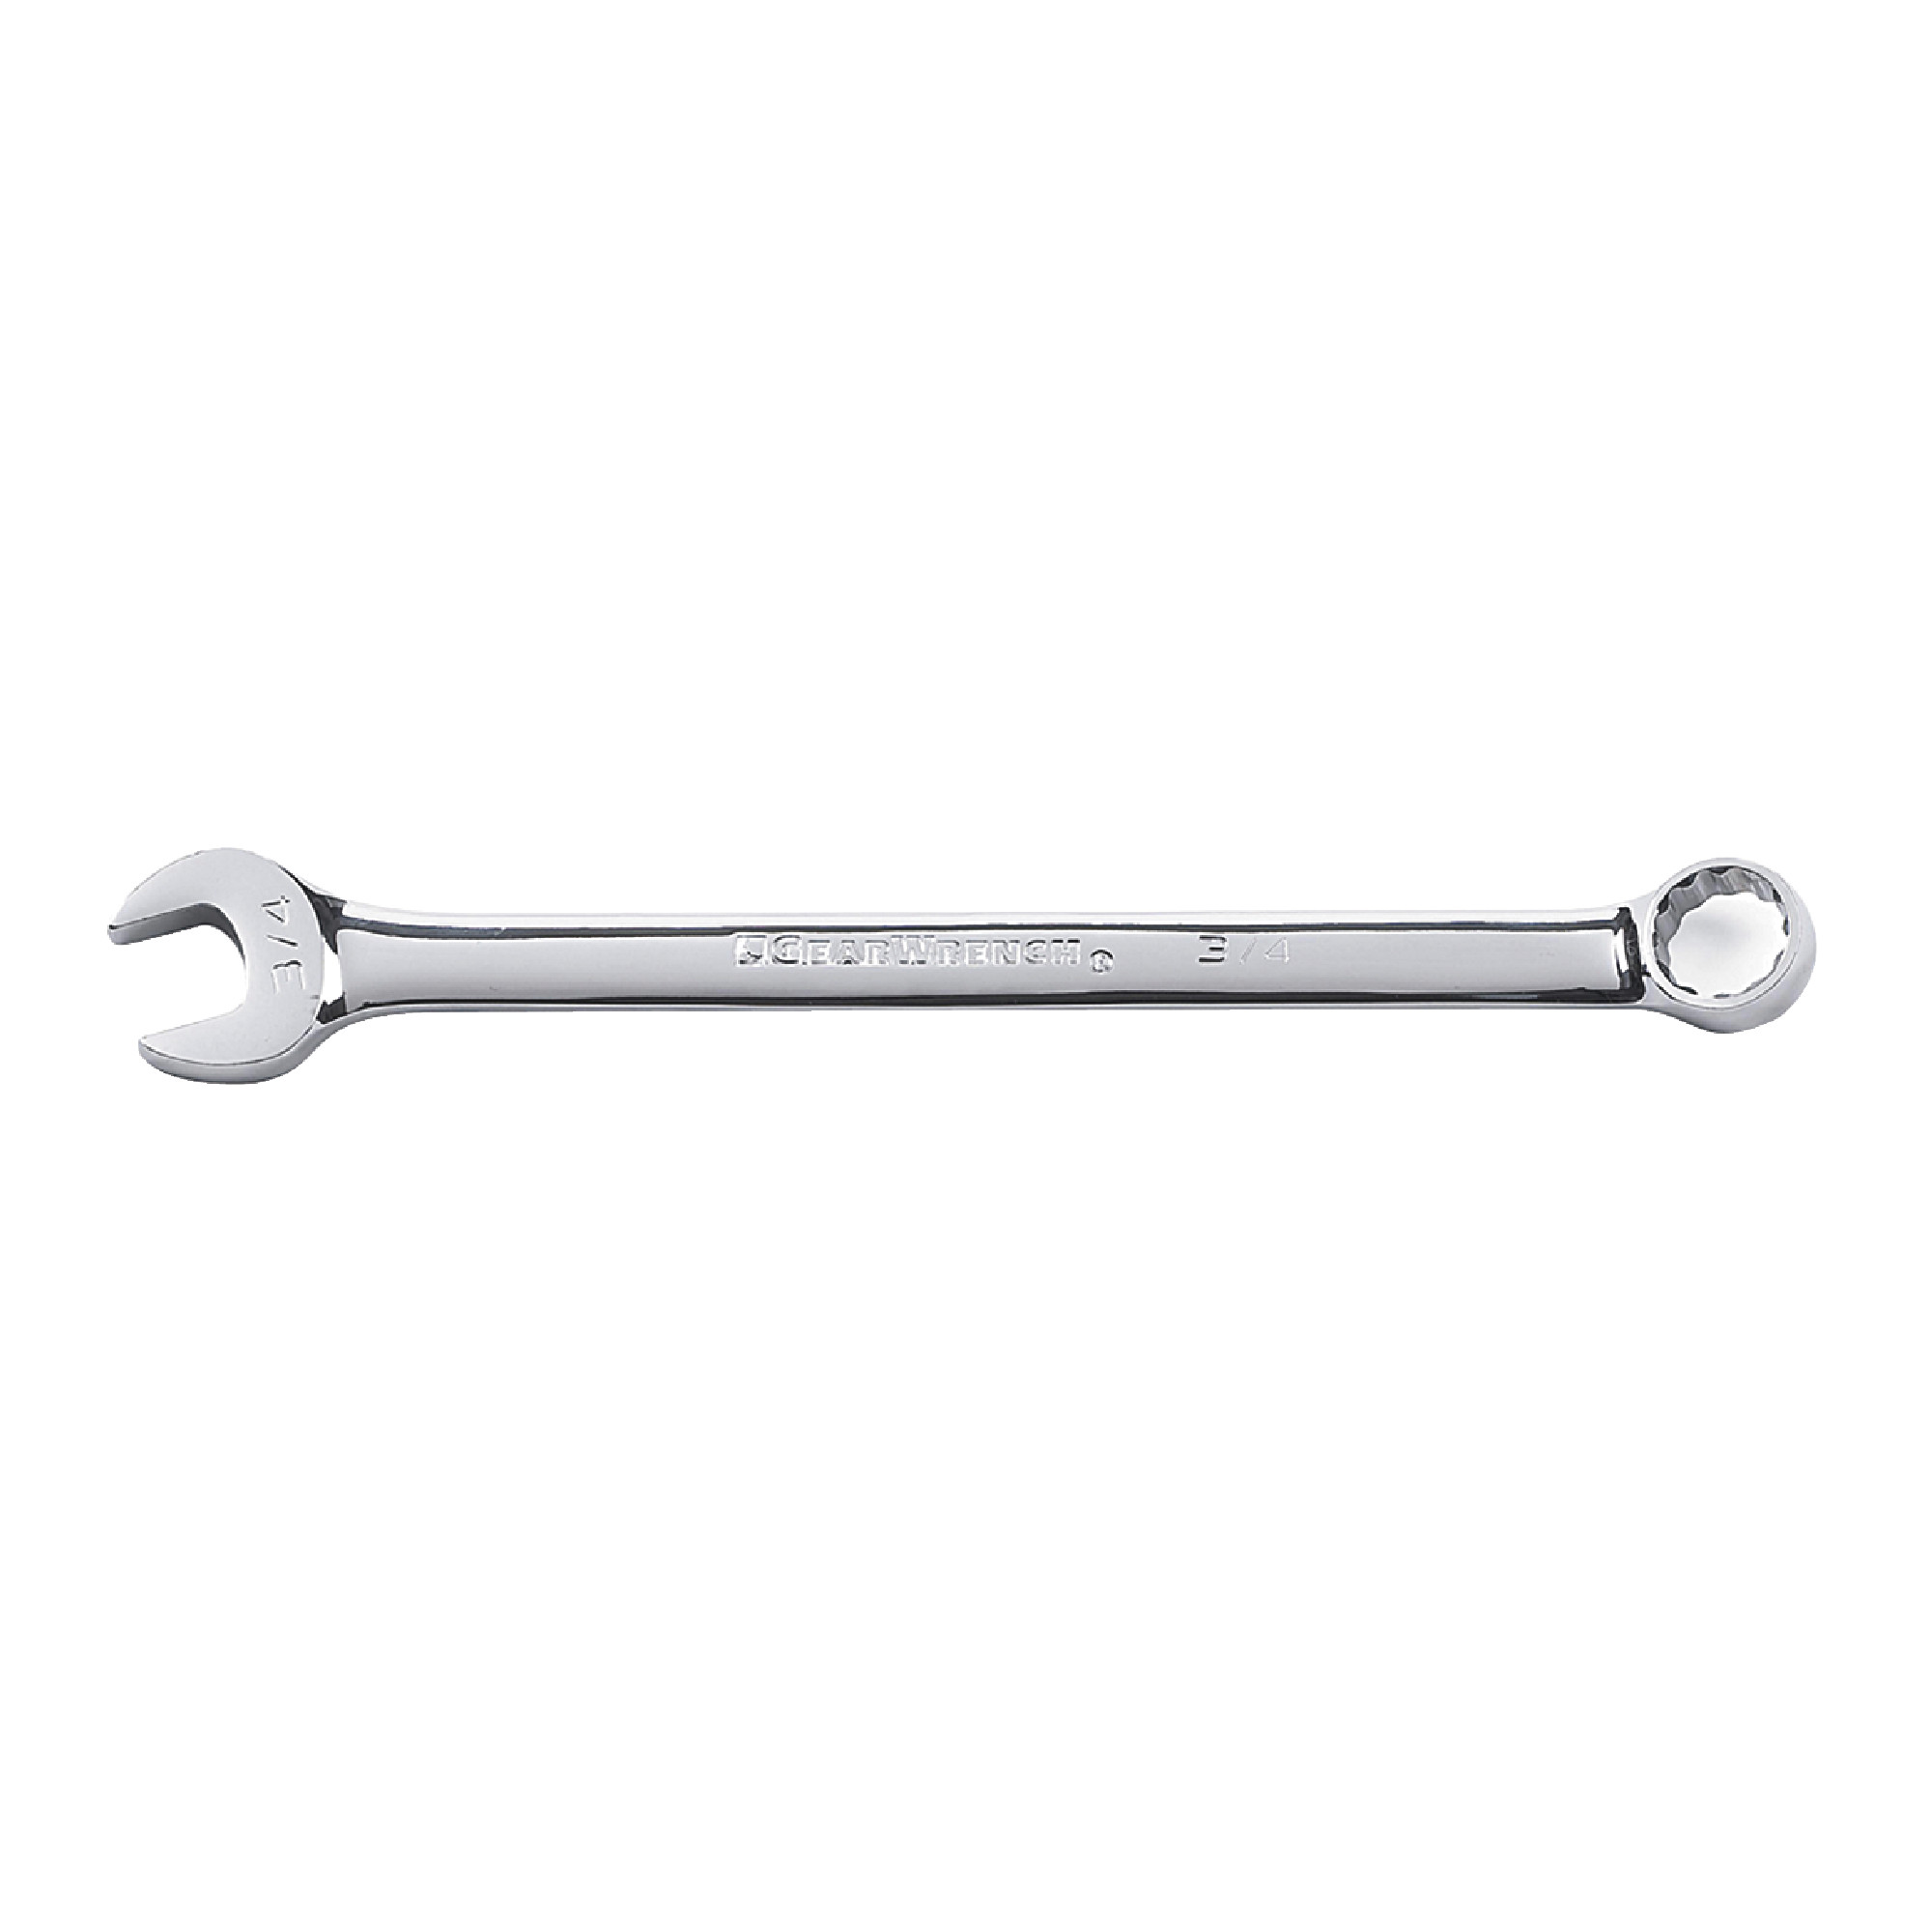 25mm 12 Point Long Pattern Combination Wrench